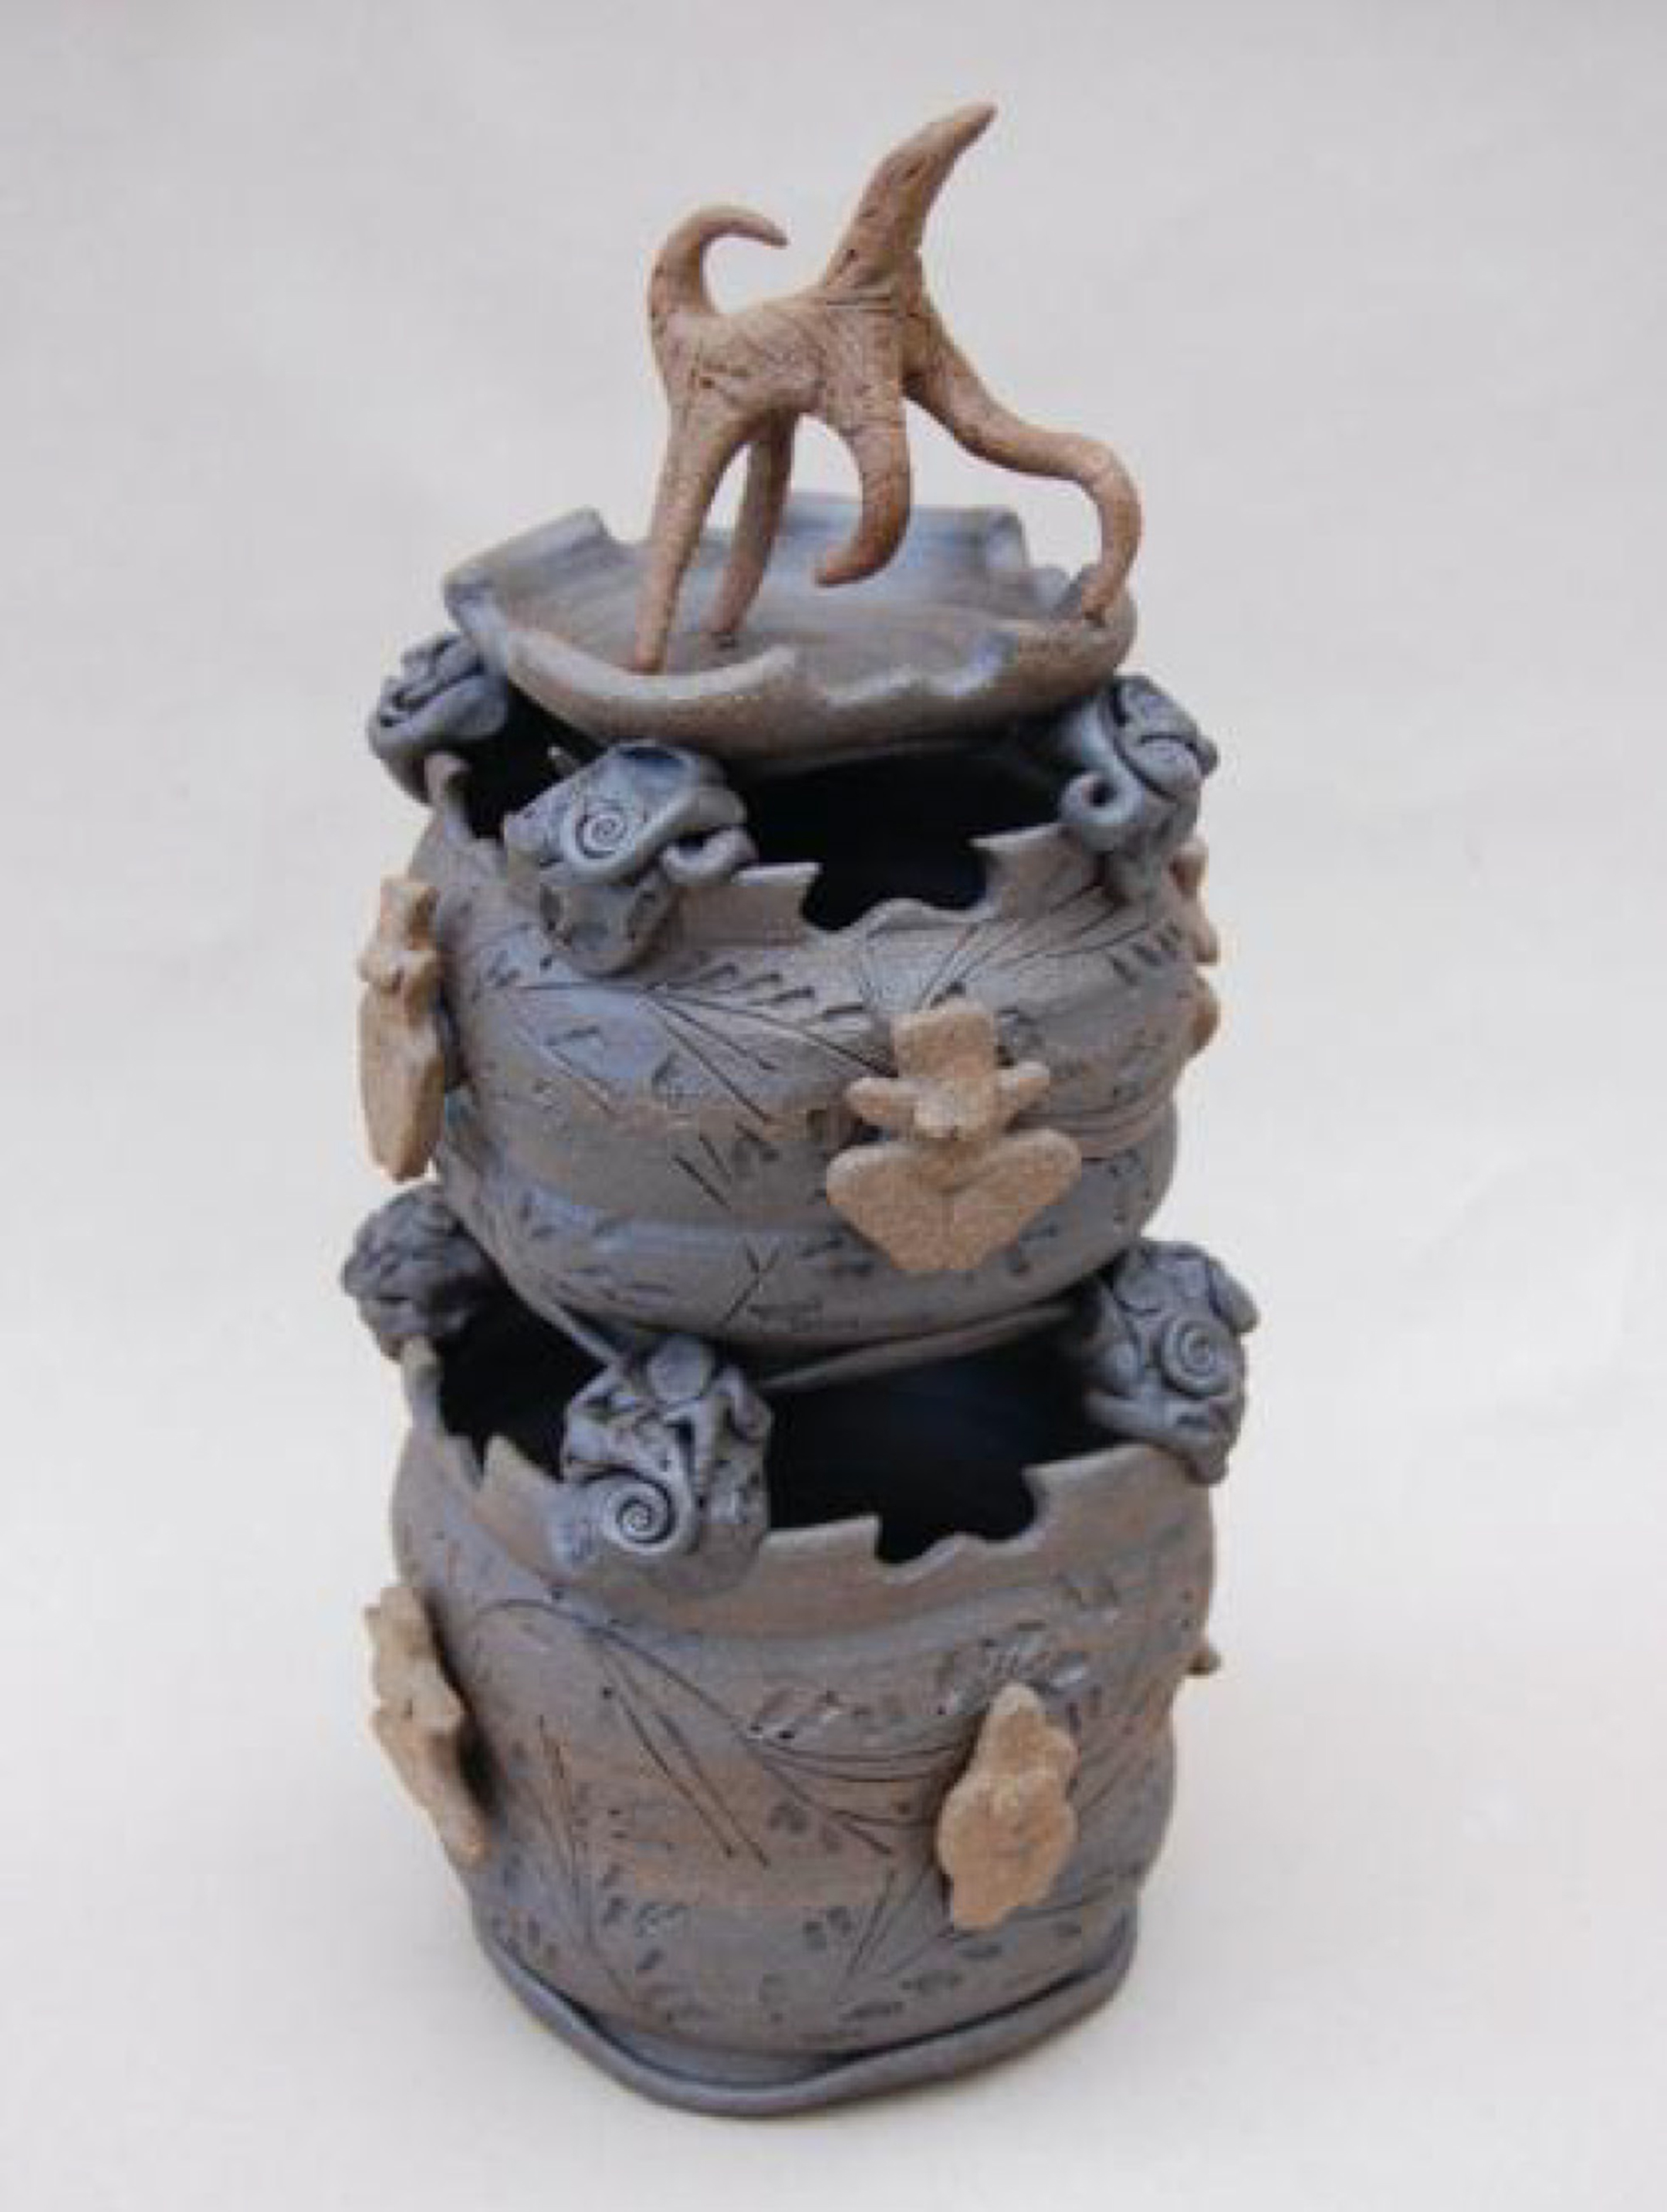 Sculpture shaped like two blue cups stacked on top of each other with animal-like figure at the top